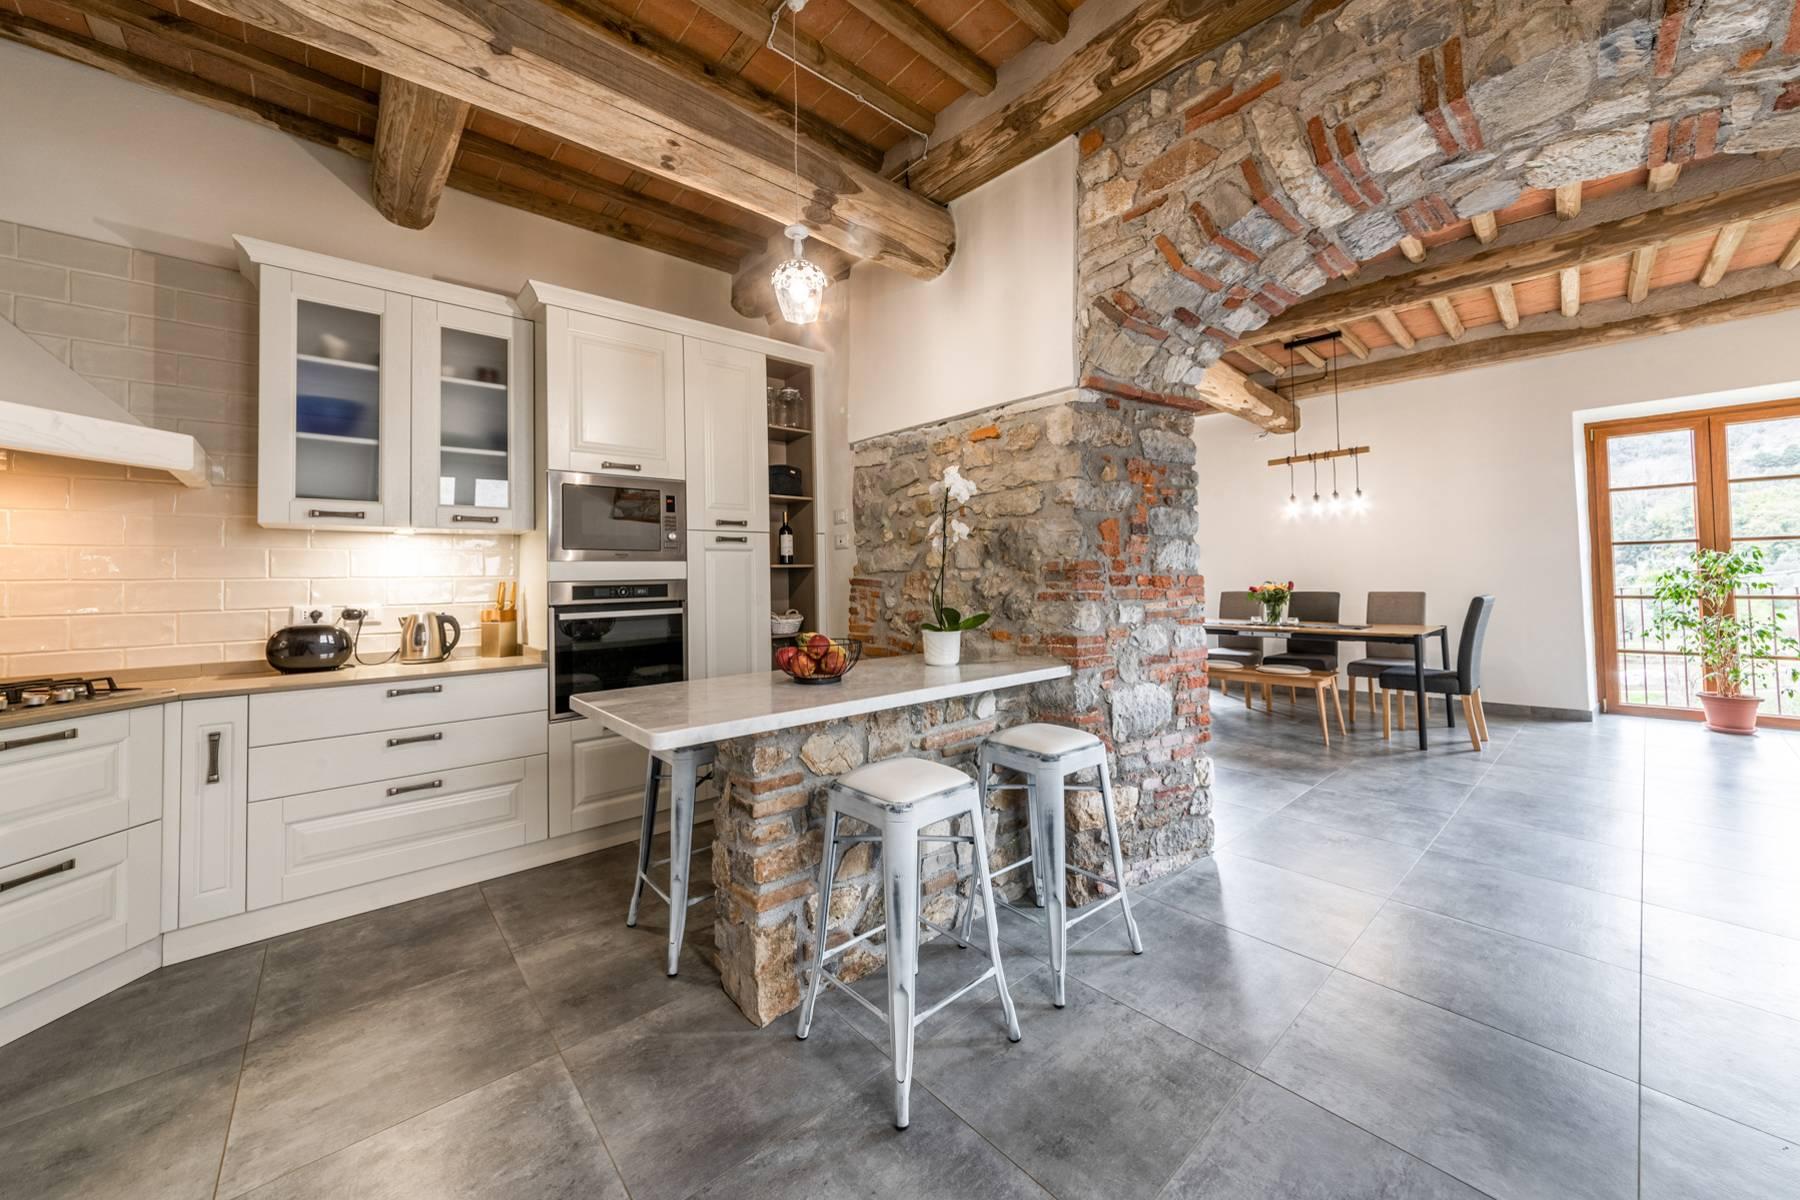 A lovingly restored semi-detached house on the hills of Lucca - 12